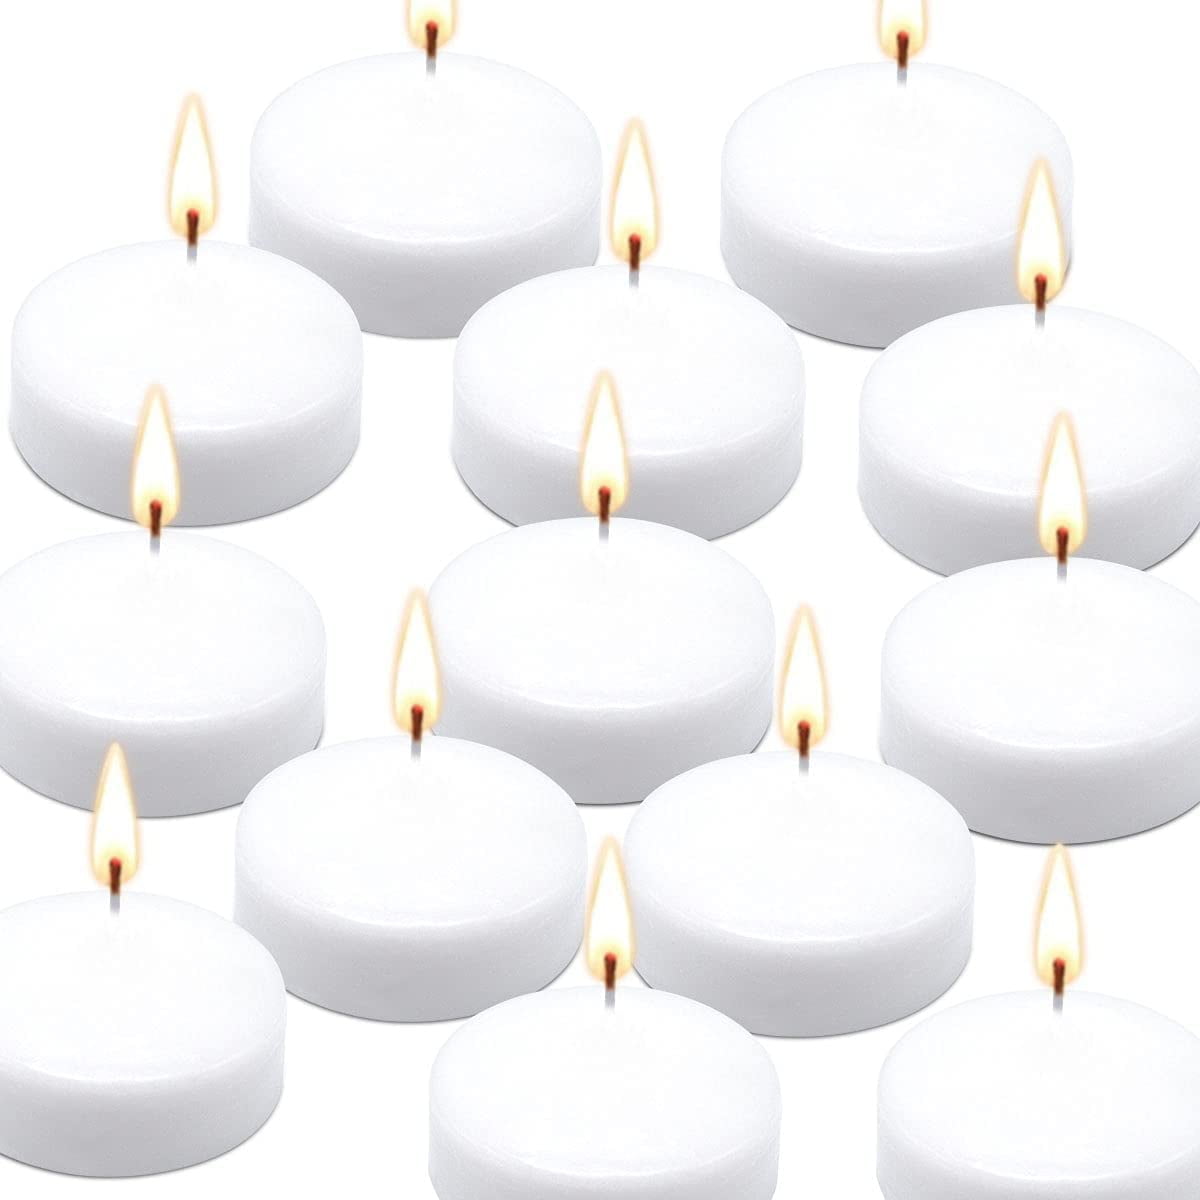 3 Inch Red Bulk Set of 10 White Wax Floating Candles Unscented Discs for Wedding Holiday & Home Decor Pool Party